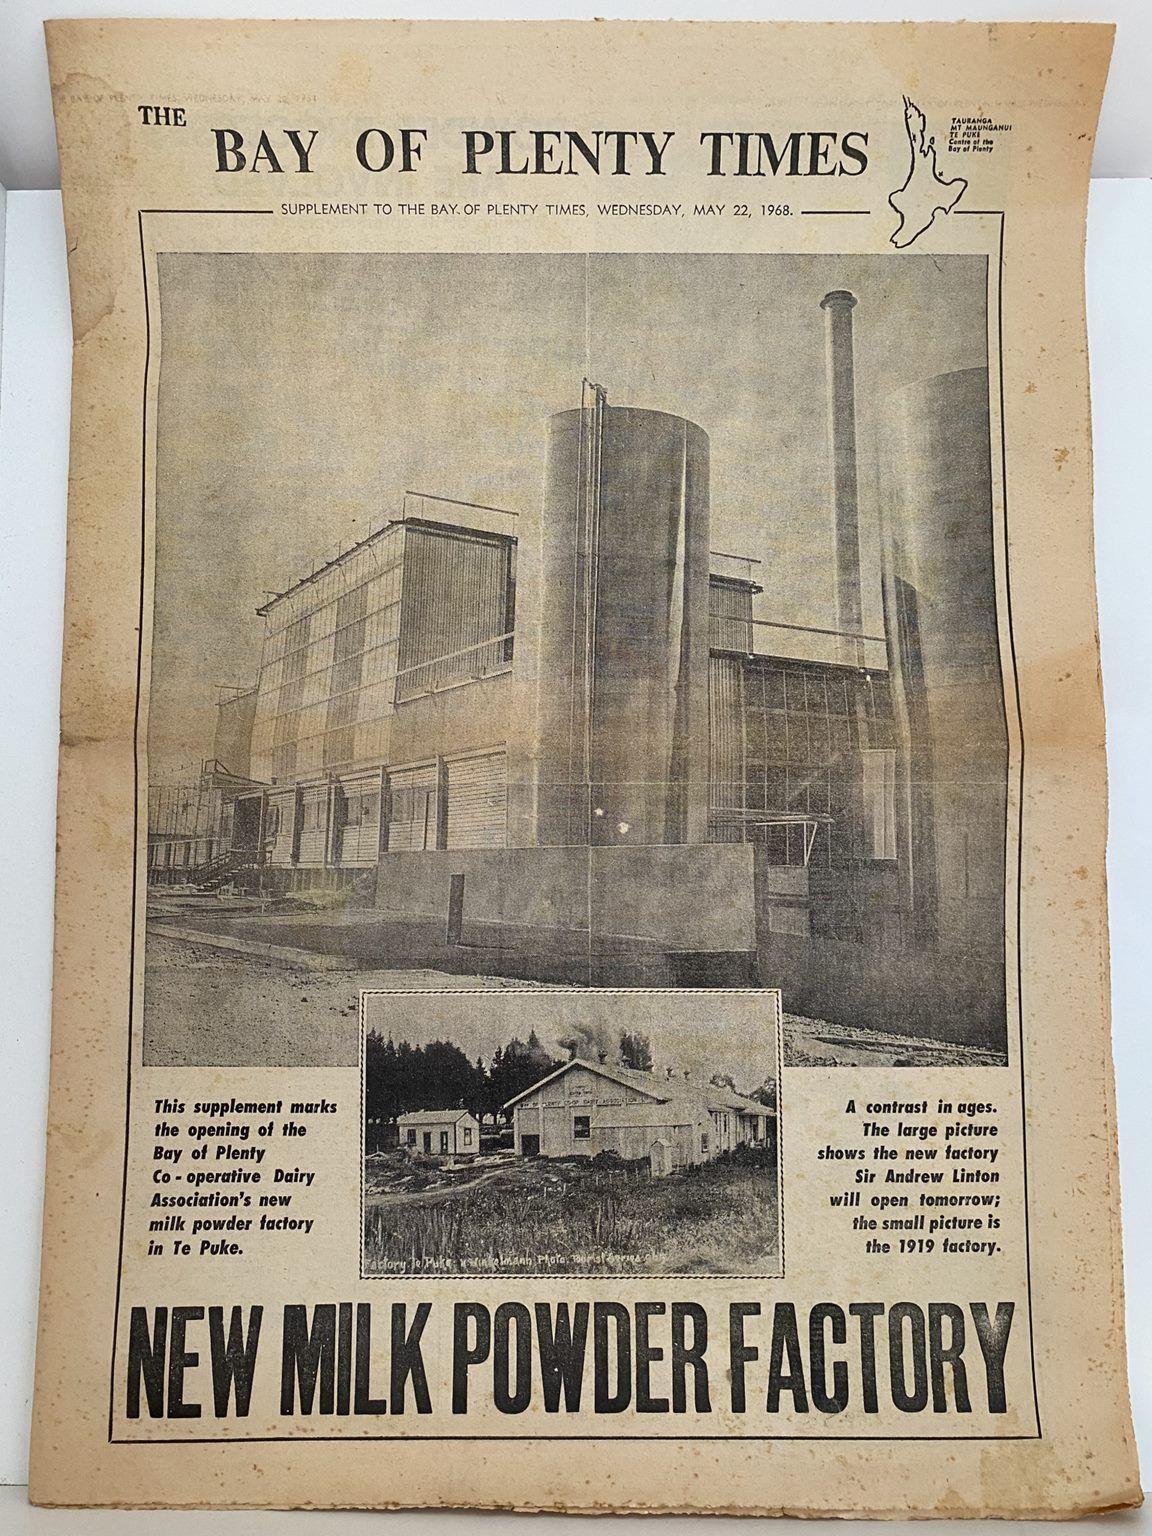 OLD NEWSPAPER: The Bay of Plenty Times - Supplement On New Milk Powder Factory 1968